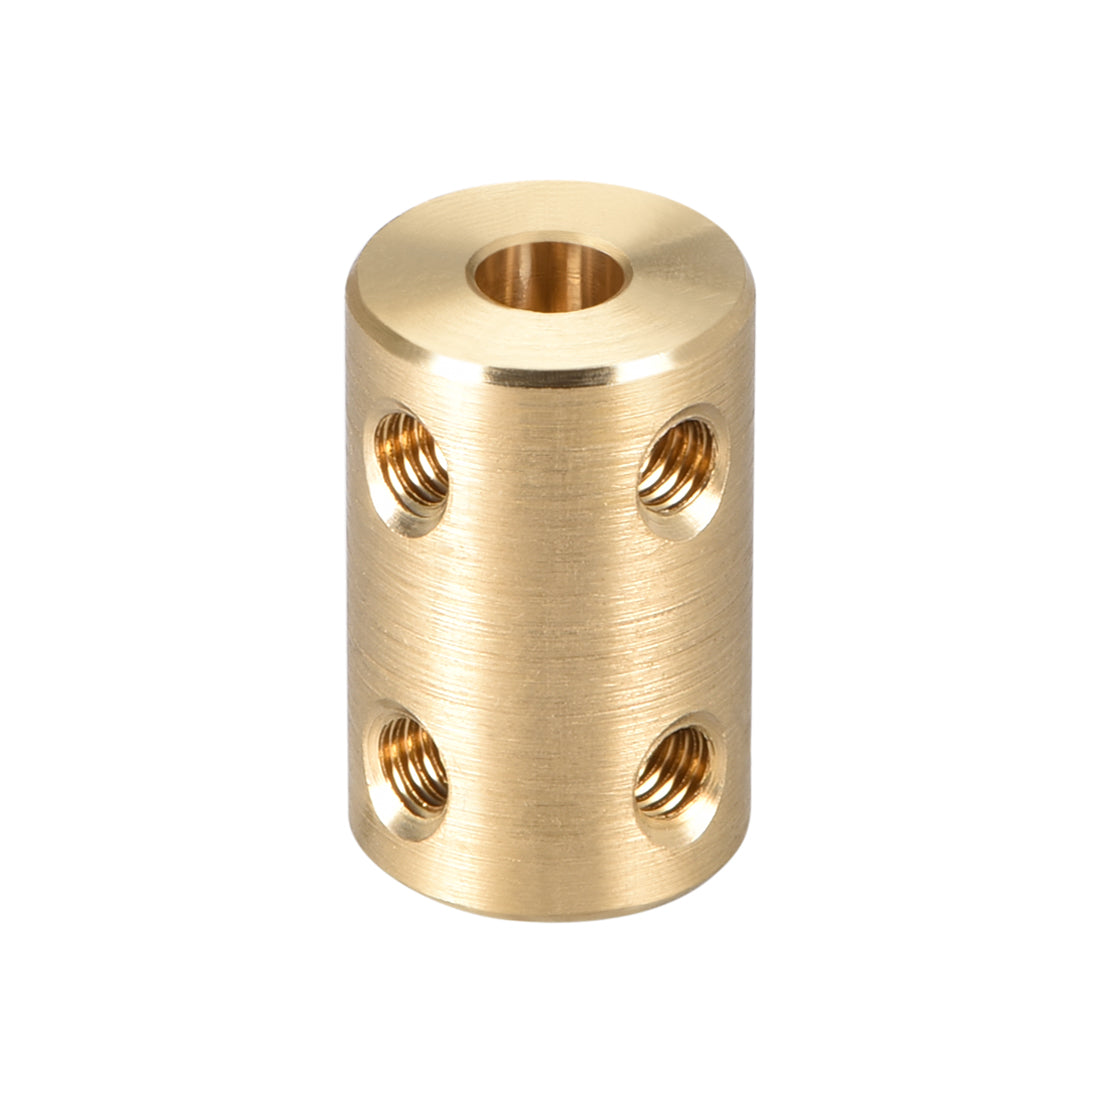 uxcell Uxcell Shaft Coupling 5mm to 6mm Bore L22xD14 Robot Motor Wheel Rigid Coupler Connector Gold Tone